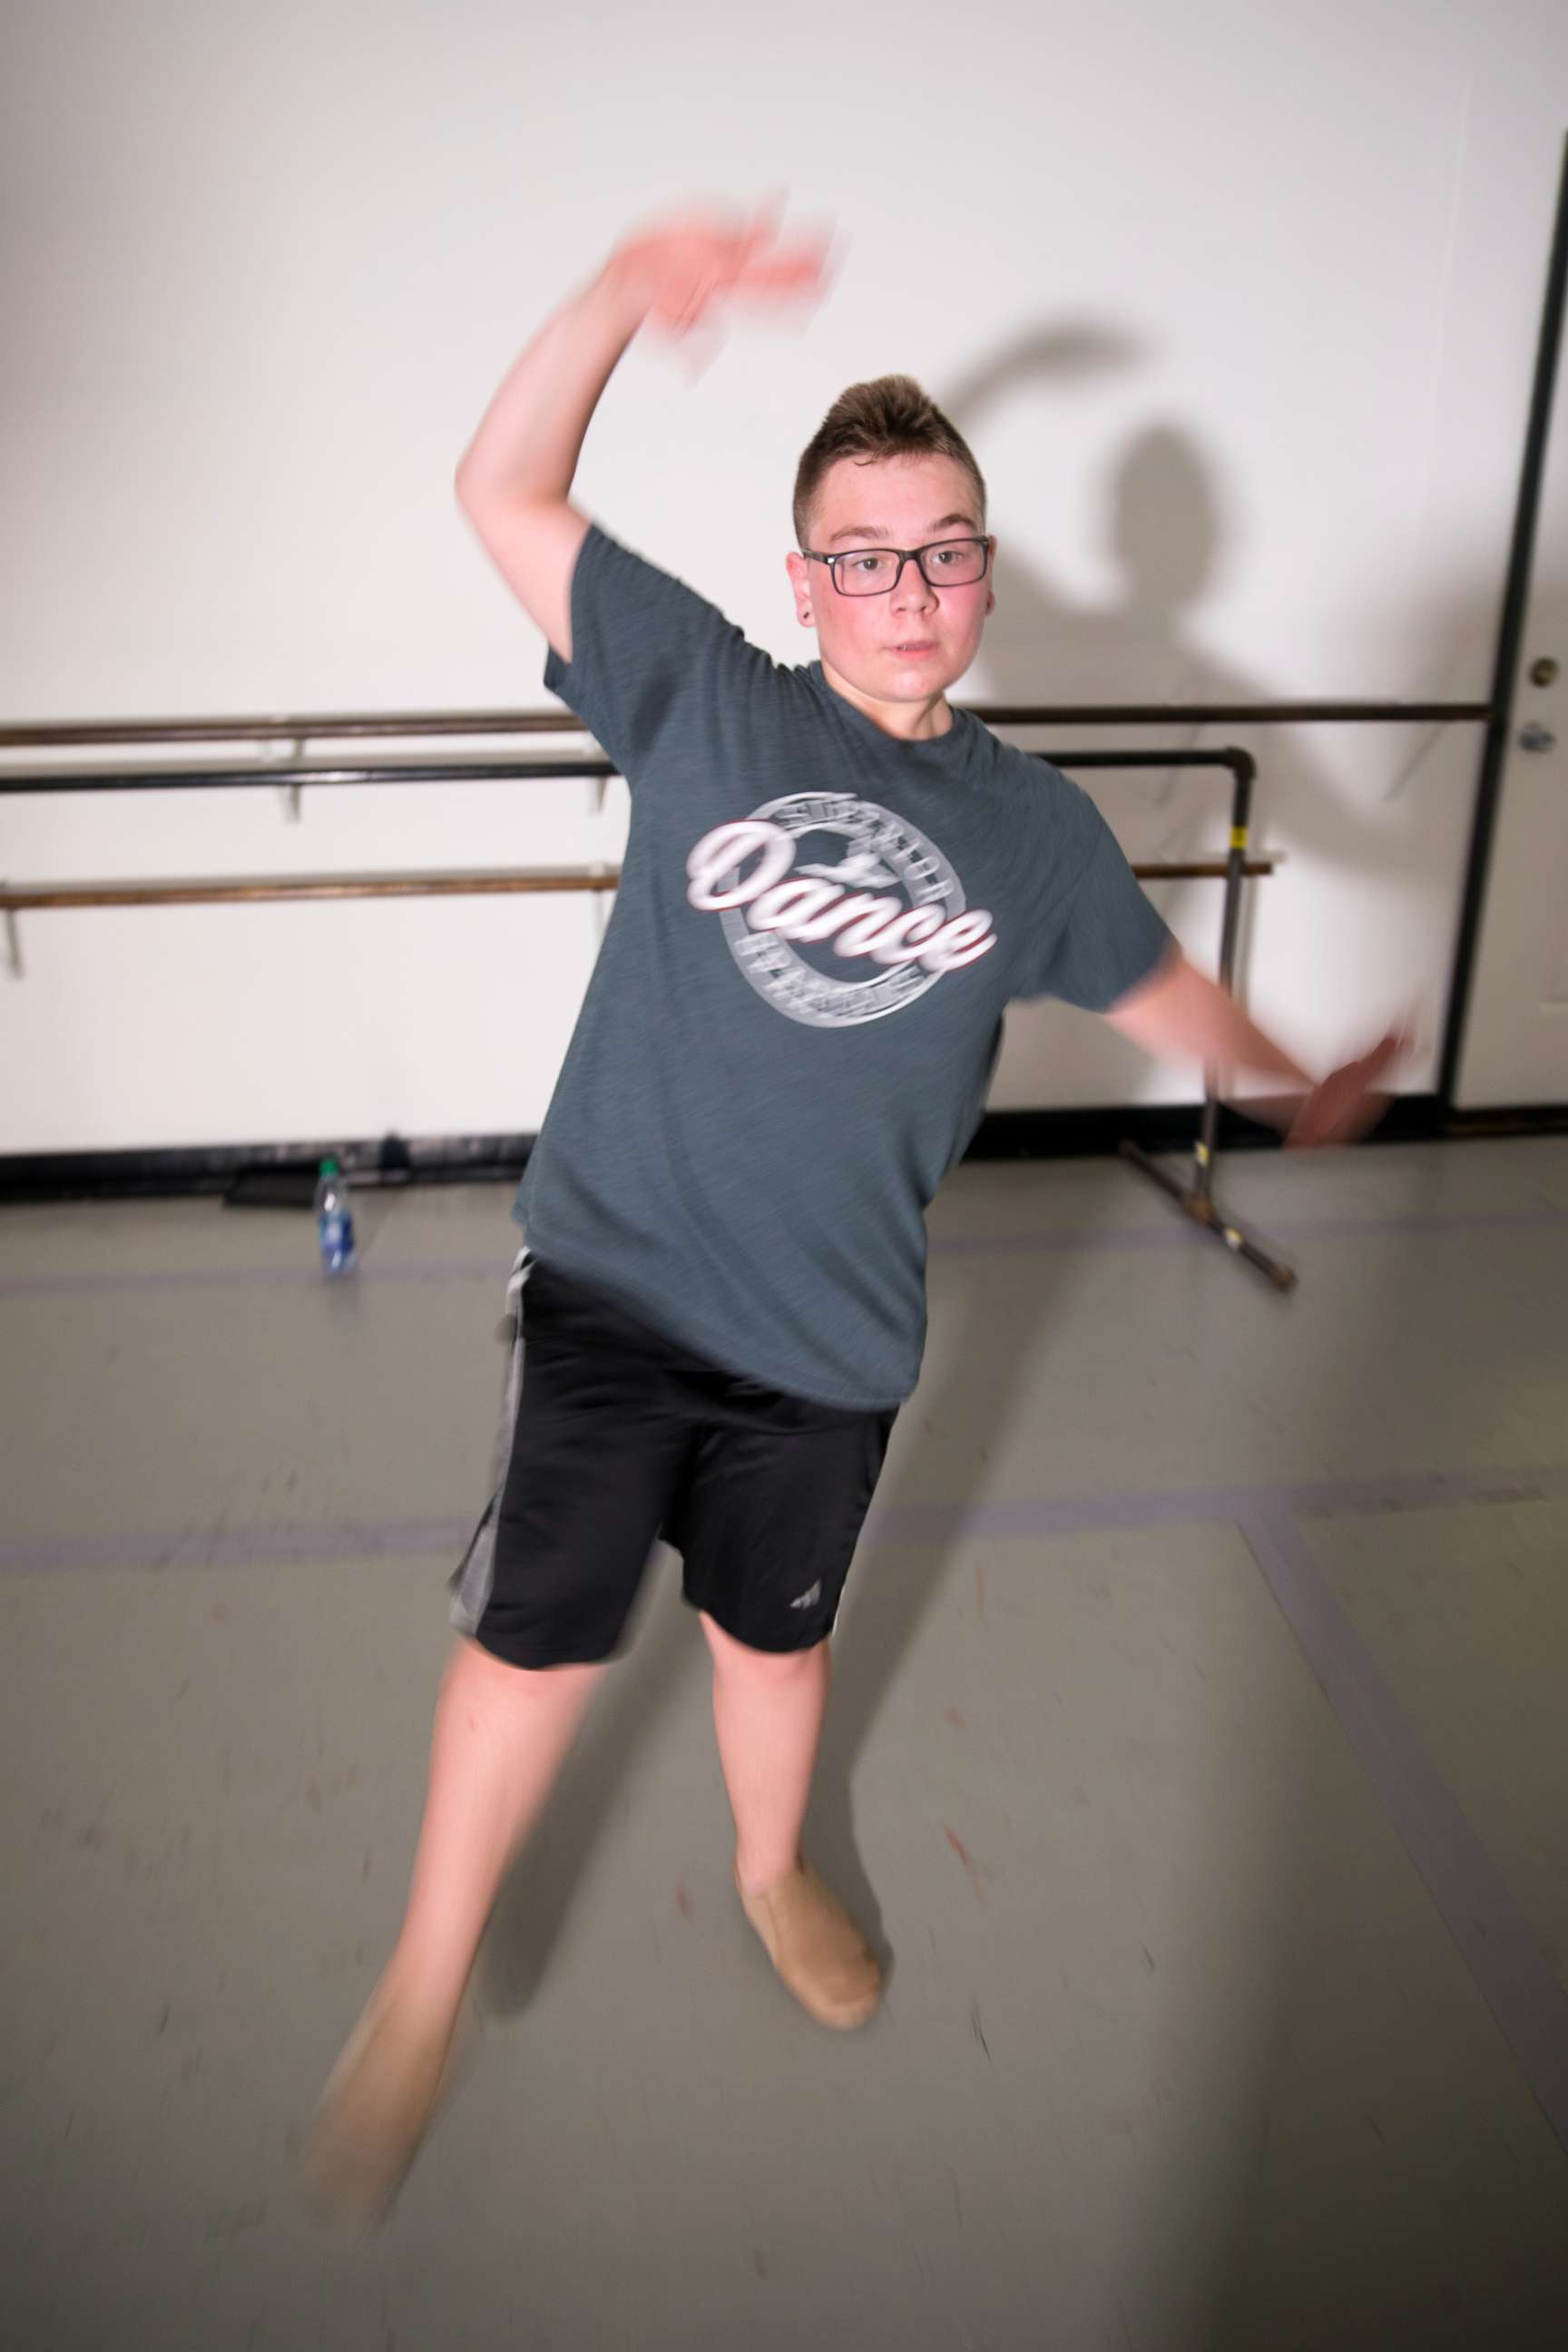 PHOTO: Kaiden Johnson practices in a dance studio in this undated photo.